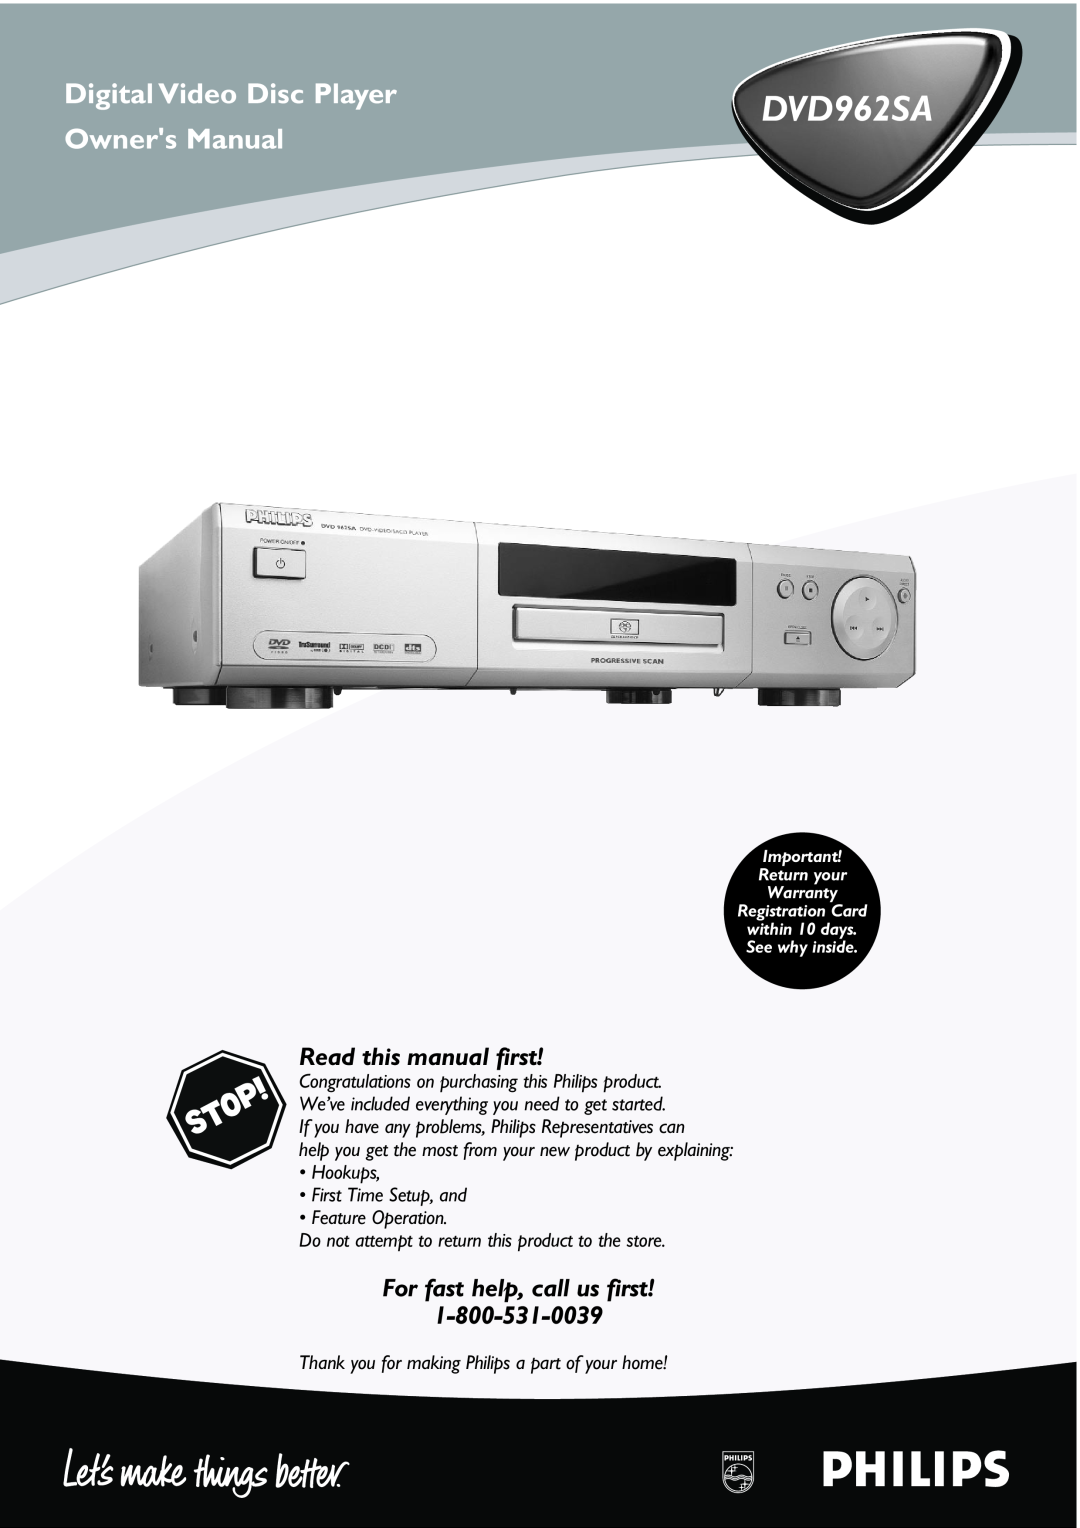 Philips DVD962SA owner manual Digital Video Disc Player, Owners Manual, Read this manual first 